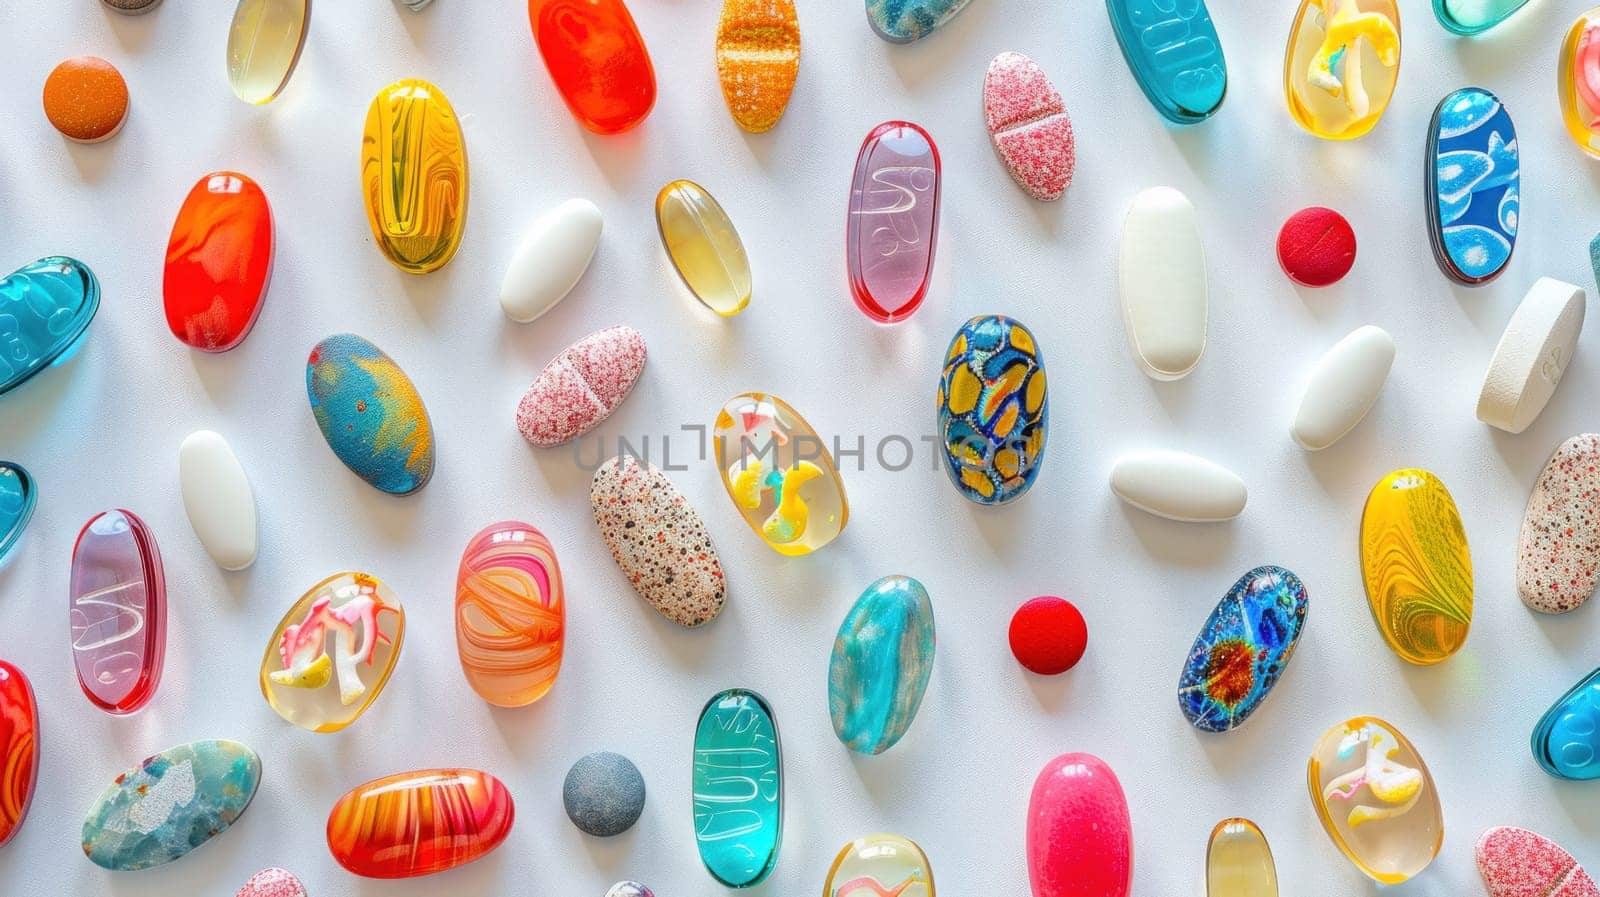 Colorful pills assortment with medicine written on them arranged on white surface for medical concept design